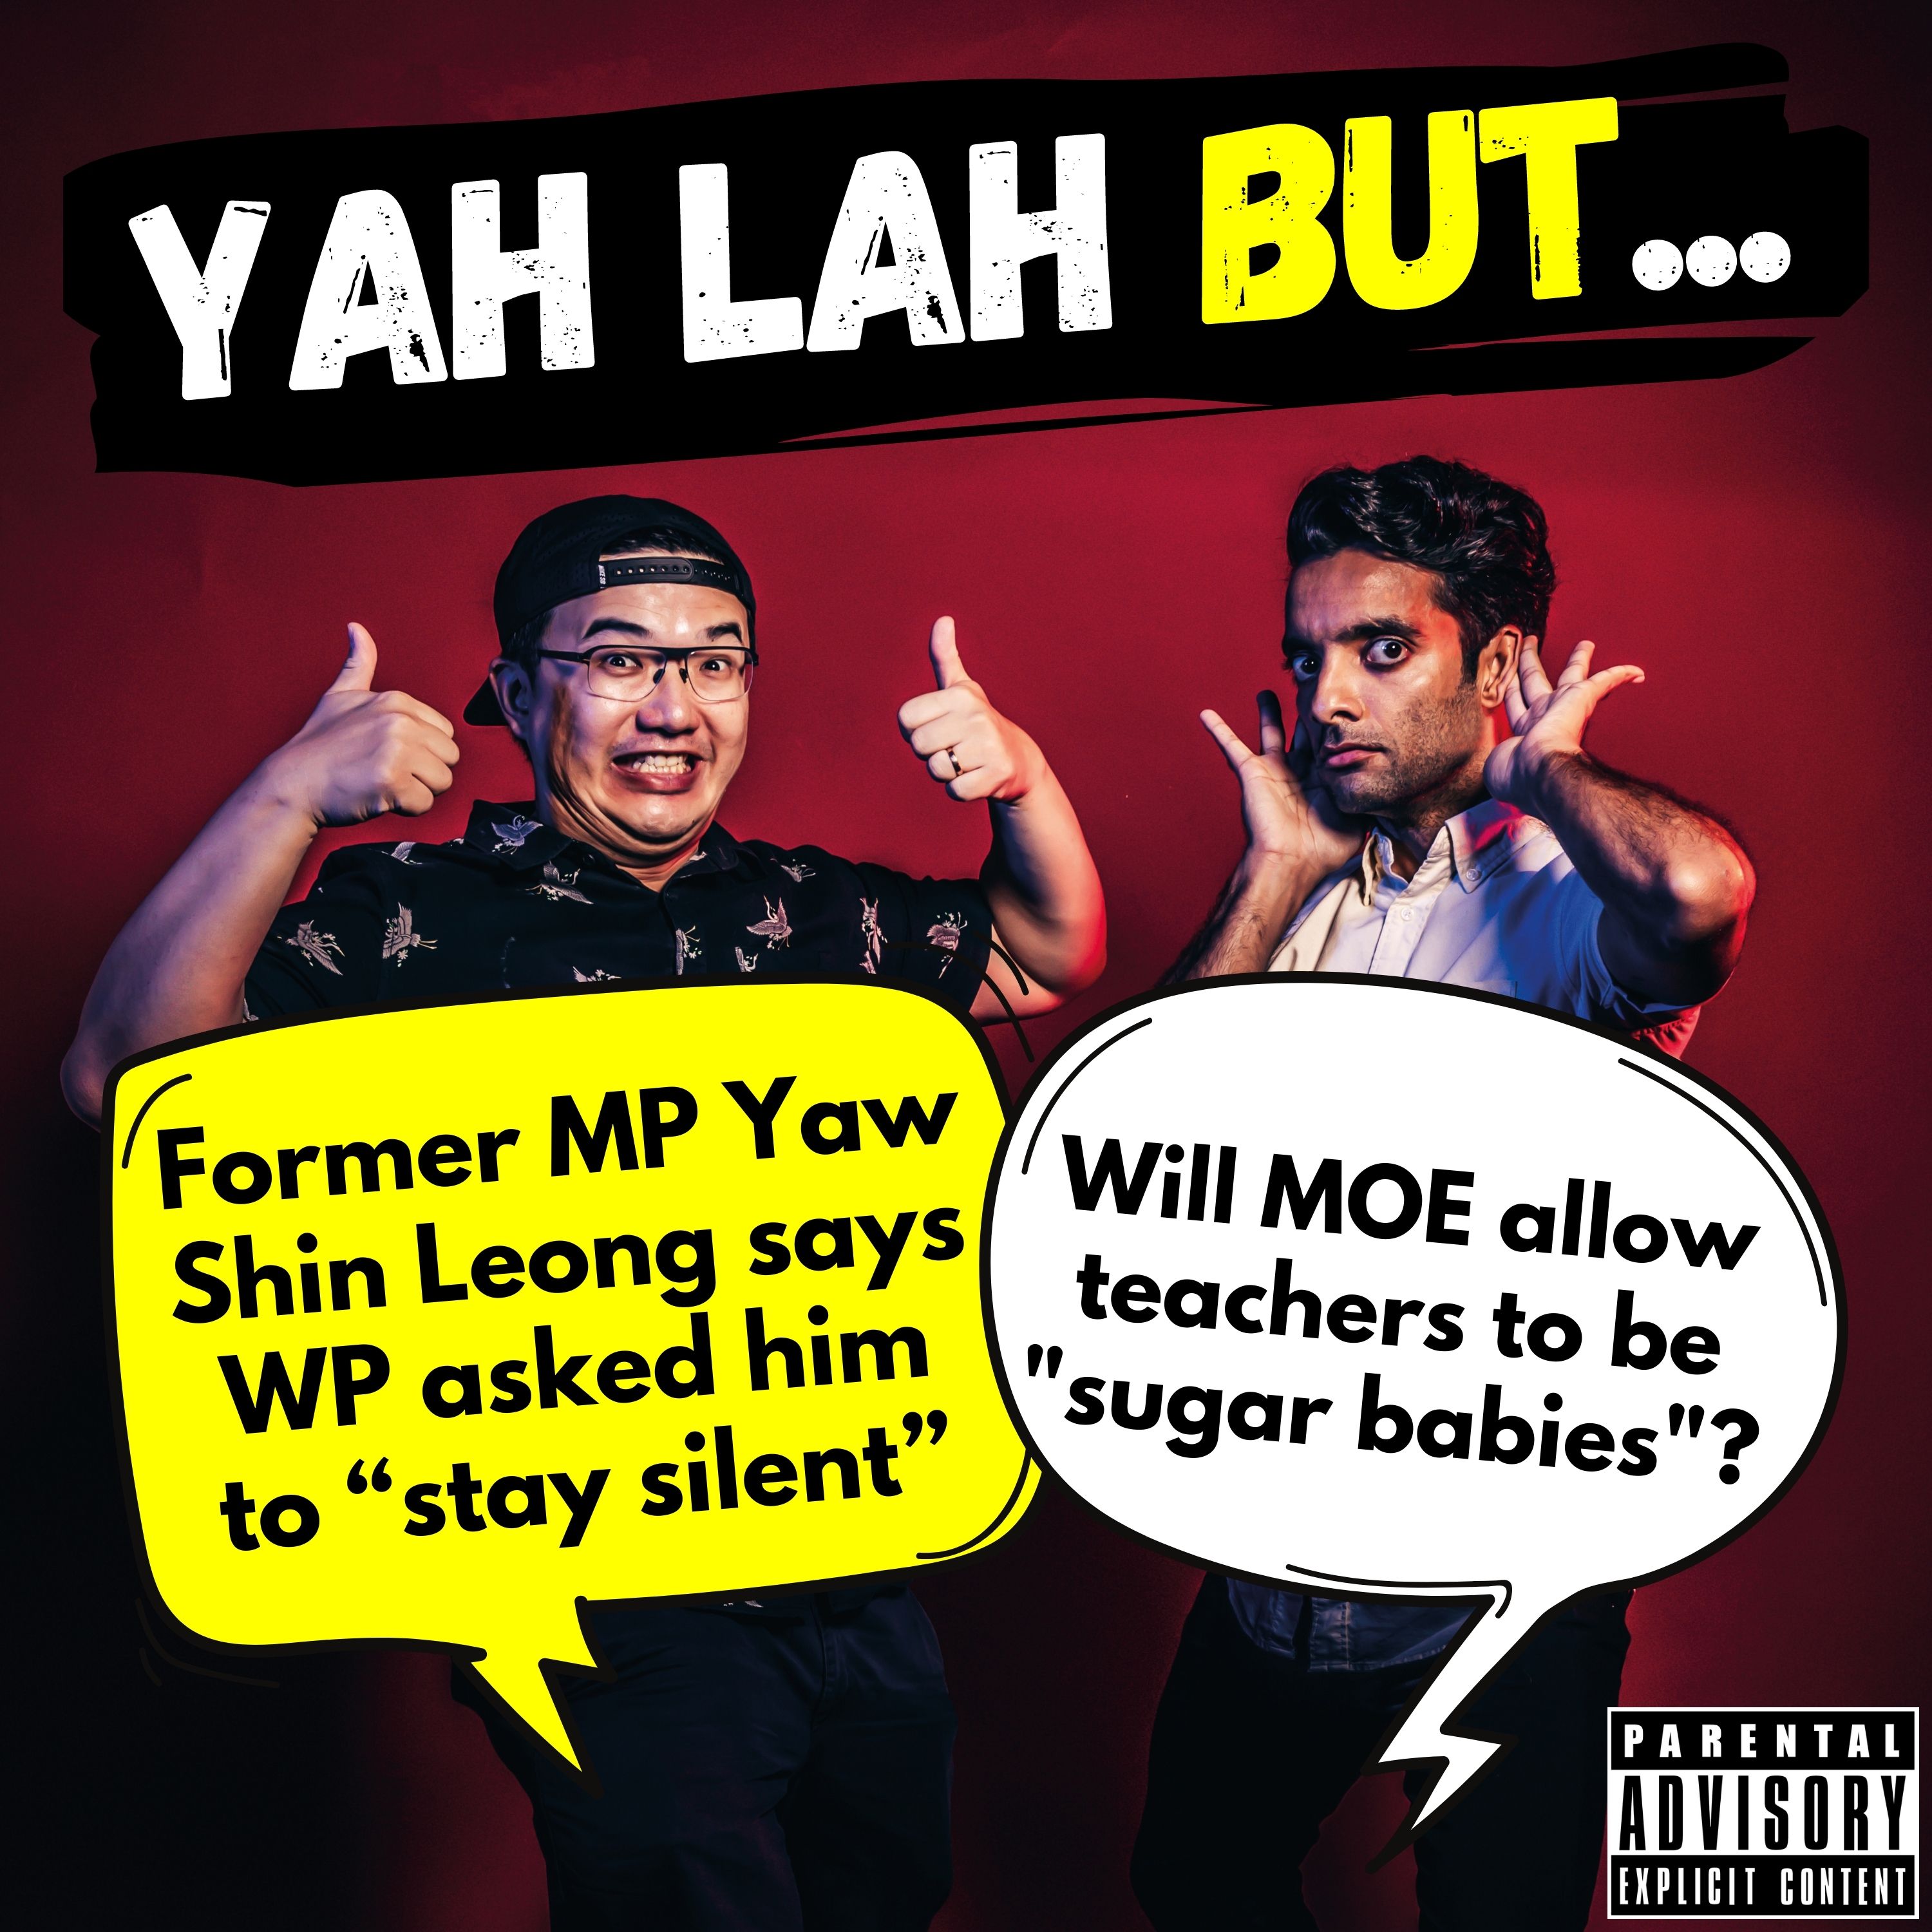 #241 - Former MP Yaw Shin Leong says WP asked him to “stay silent” & will MOE allow teachers to be ”sugar babies”?